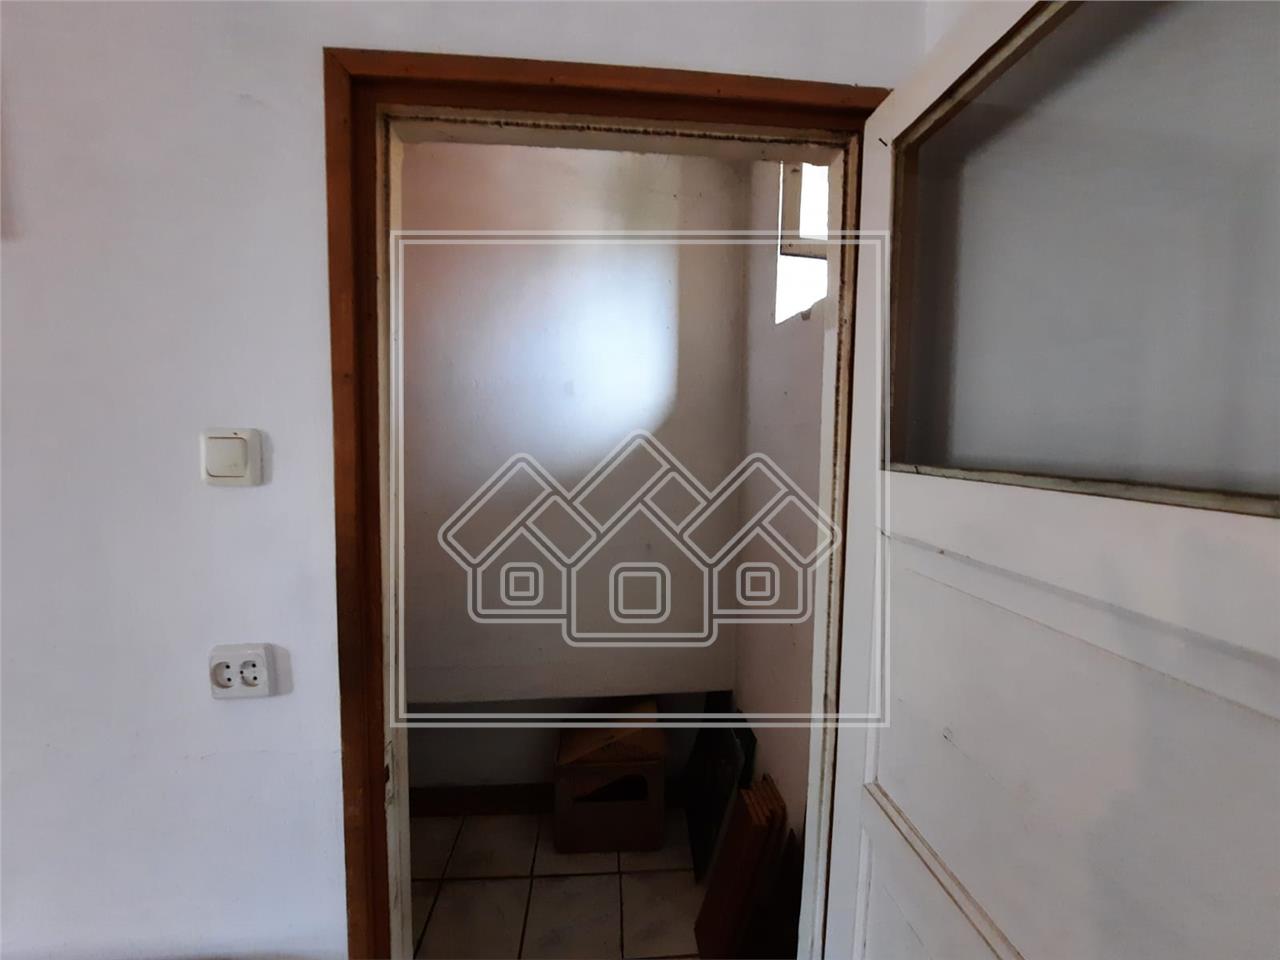 House for sale in Sibiu - 220 sqm - quiet area, almost central